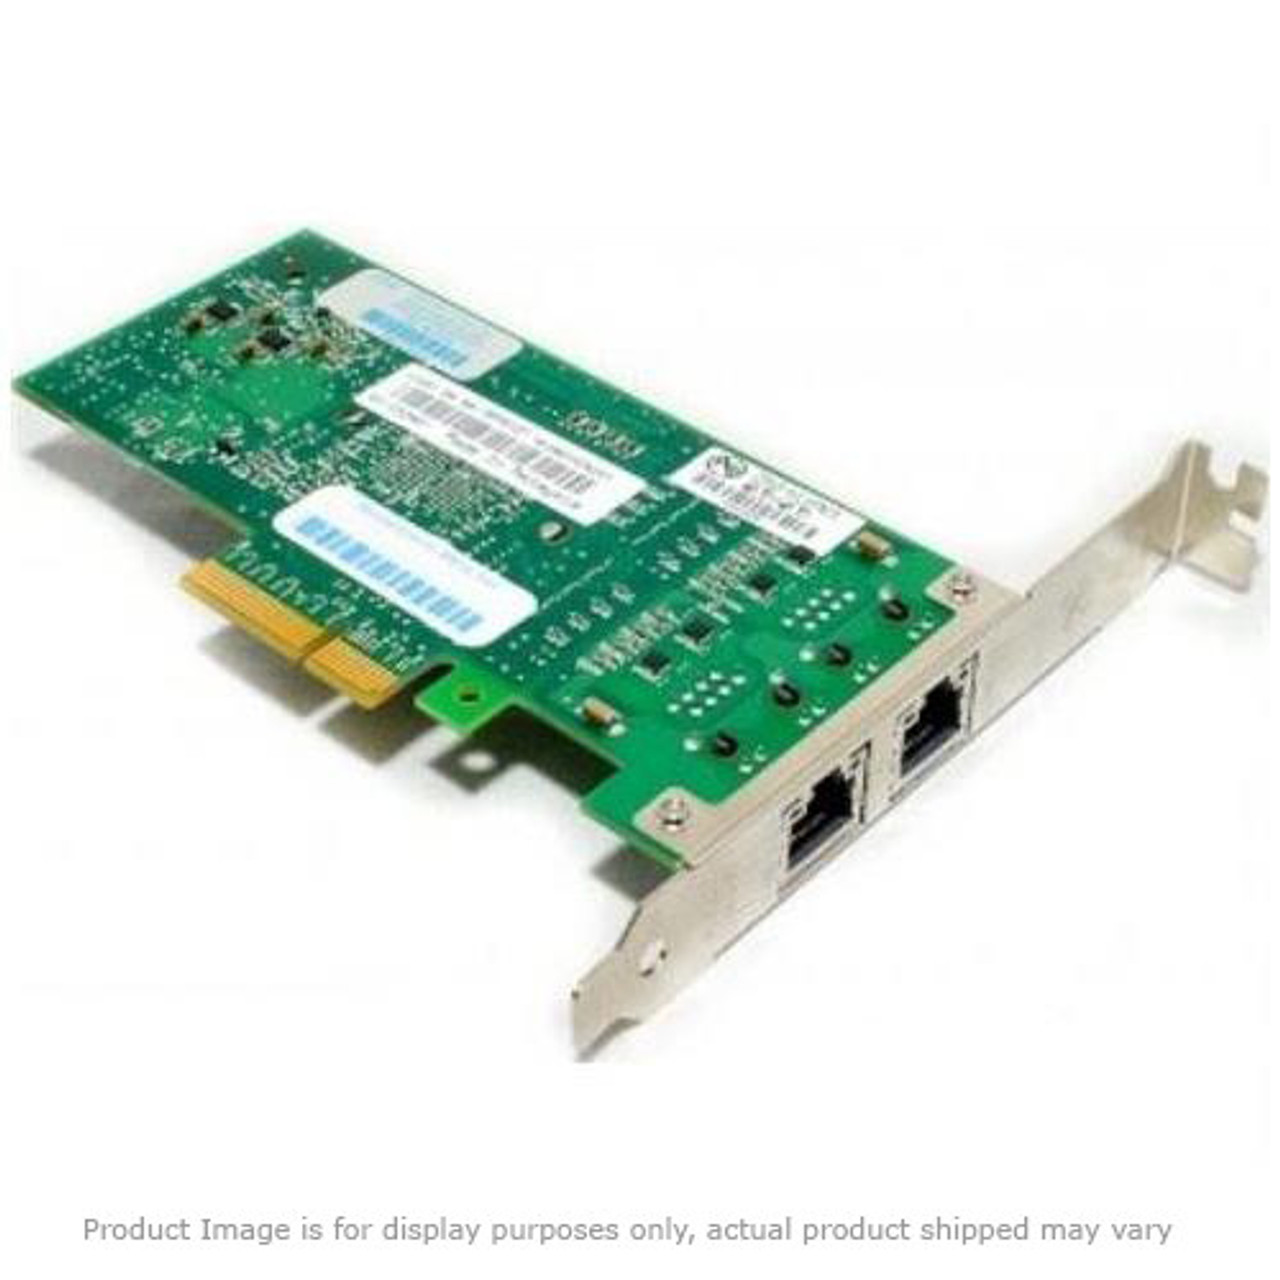 3C507TP 3Com Token Ring 16MBPS PCI Velocity Network Card